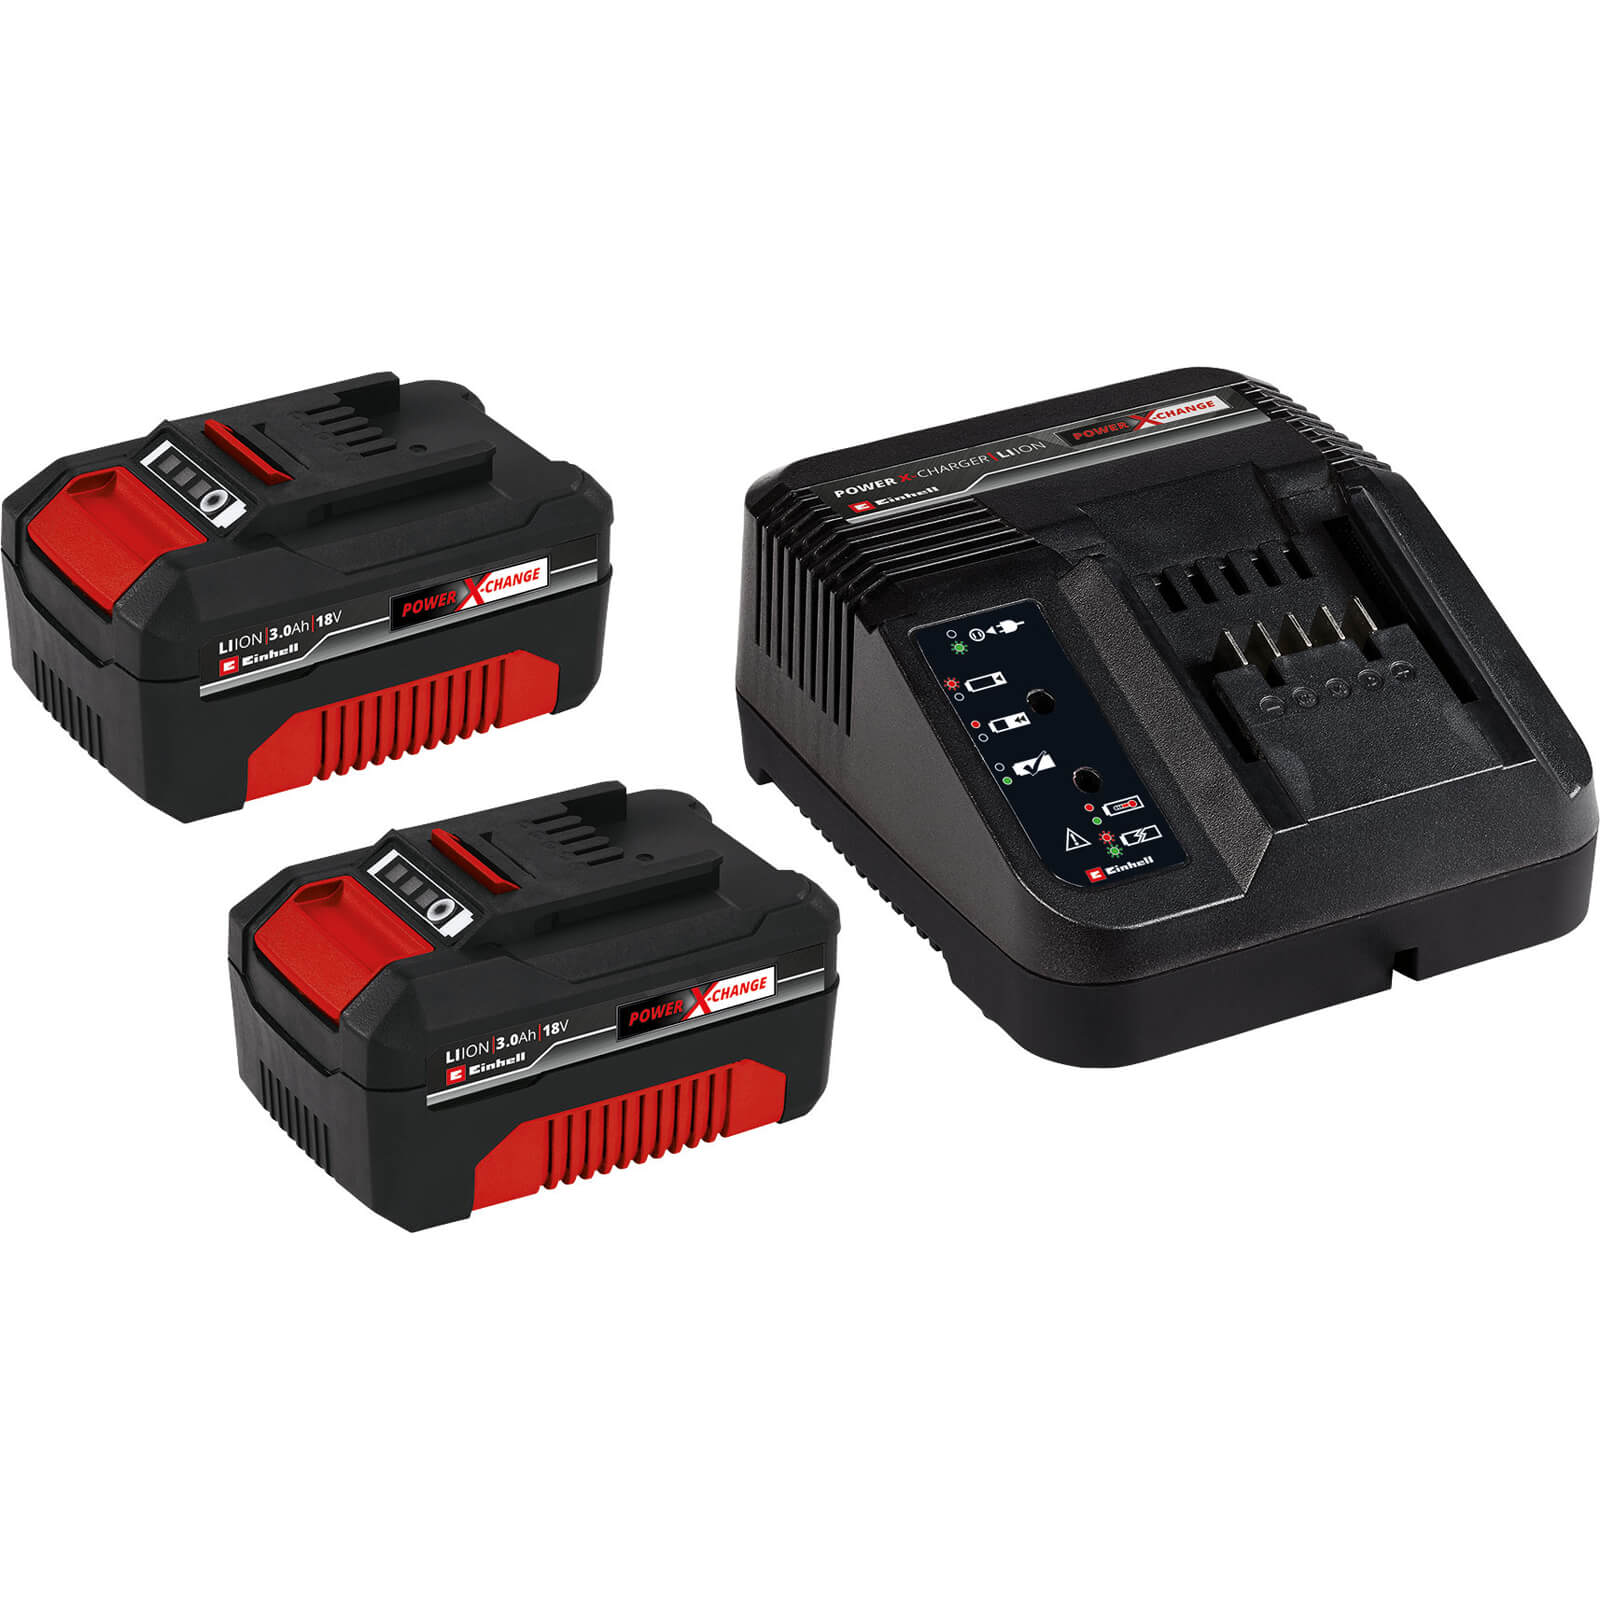 Einhell 4512090 Dualport Power X-Change 18-Volt 3-Amp Lithum-Ion Fast Port  Battery Station, Dual Rapid Charger, Red